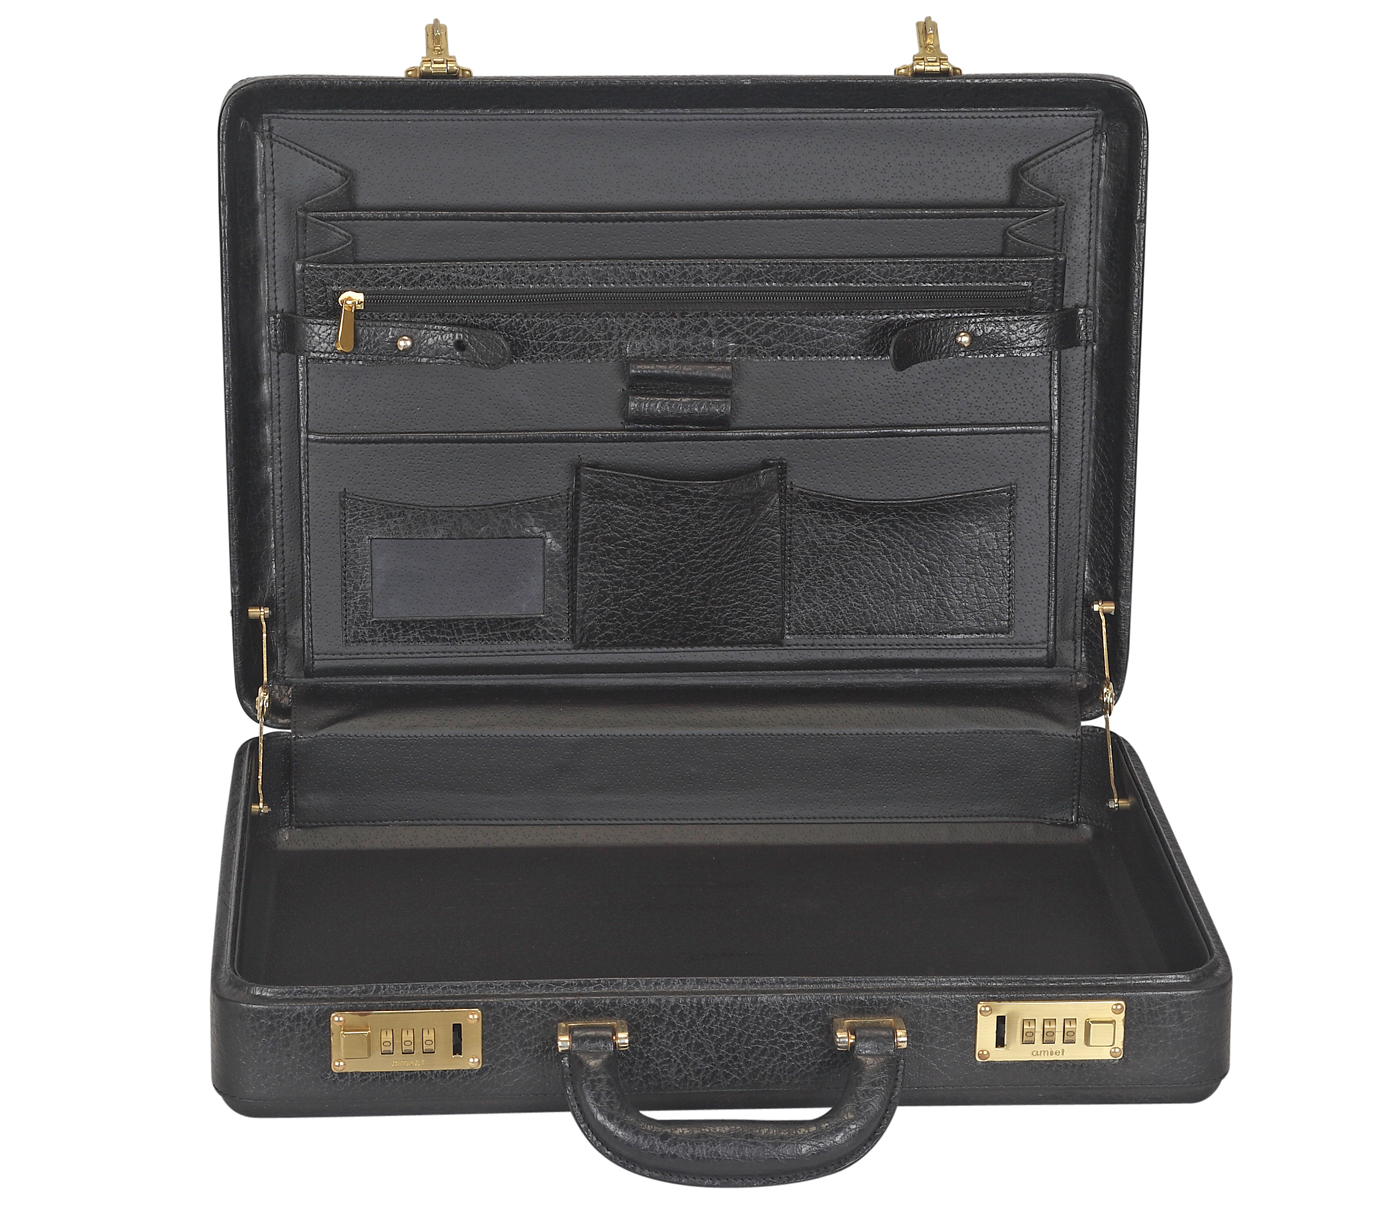 BC14--Briefcase hard top in Genuine Leather - Black